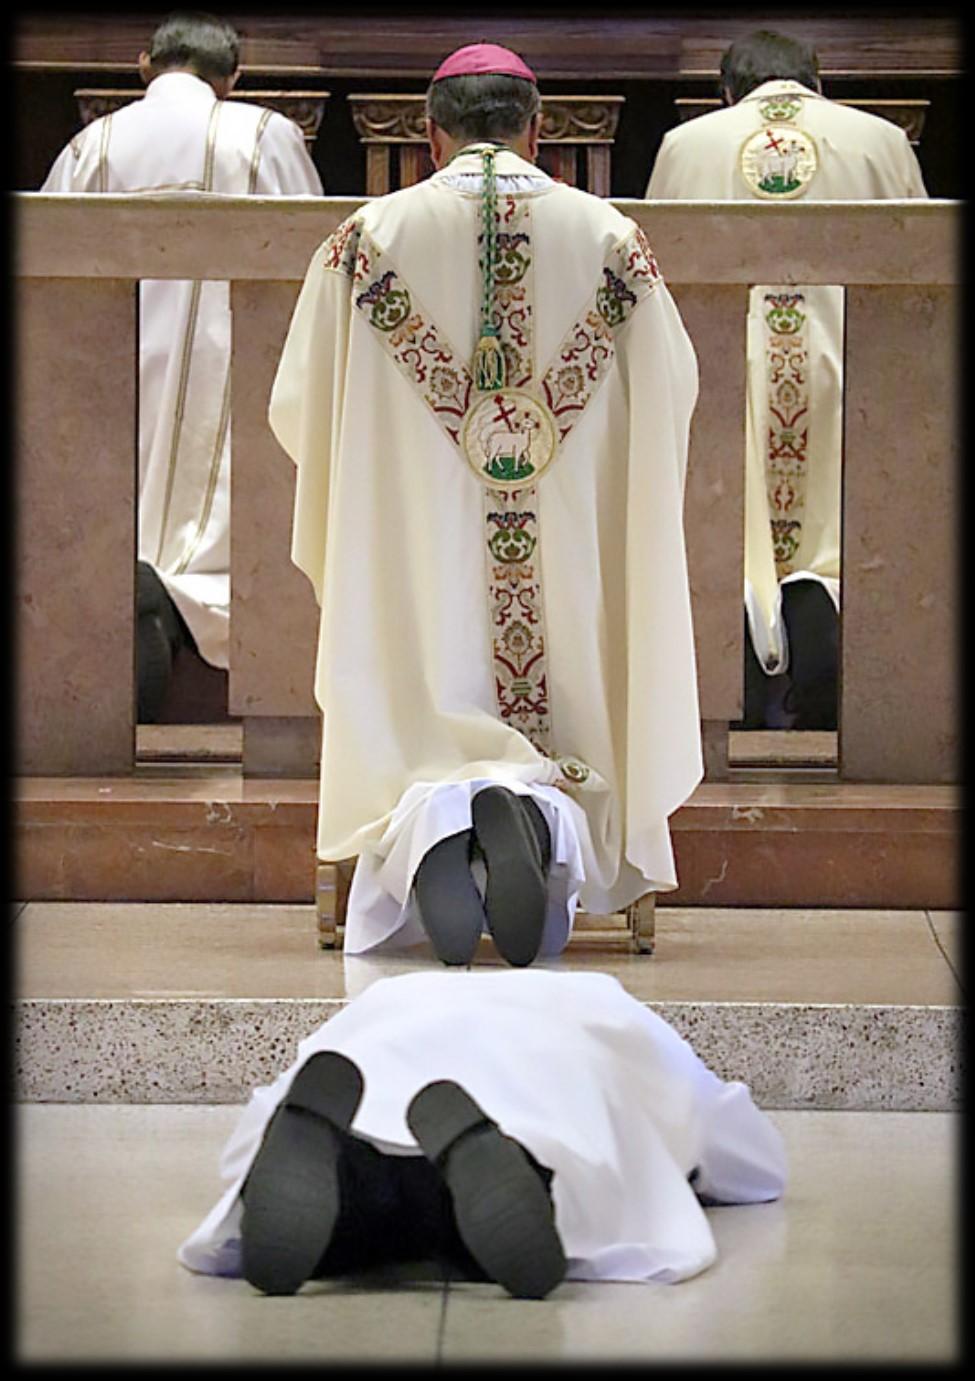 After he recited his profession of vows and received the solemn blessing from the provincial, he went to the altar and signed the act of profession what a great feeling of love filled the Church.